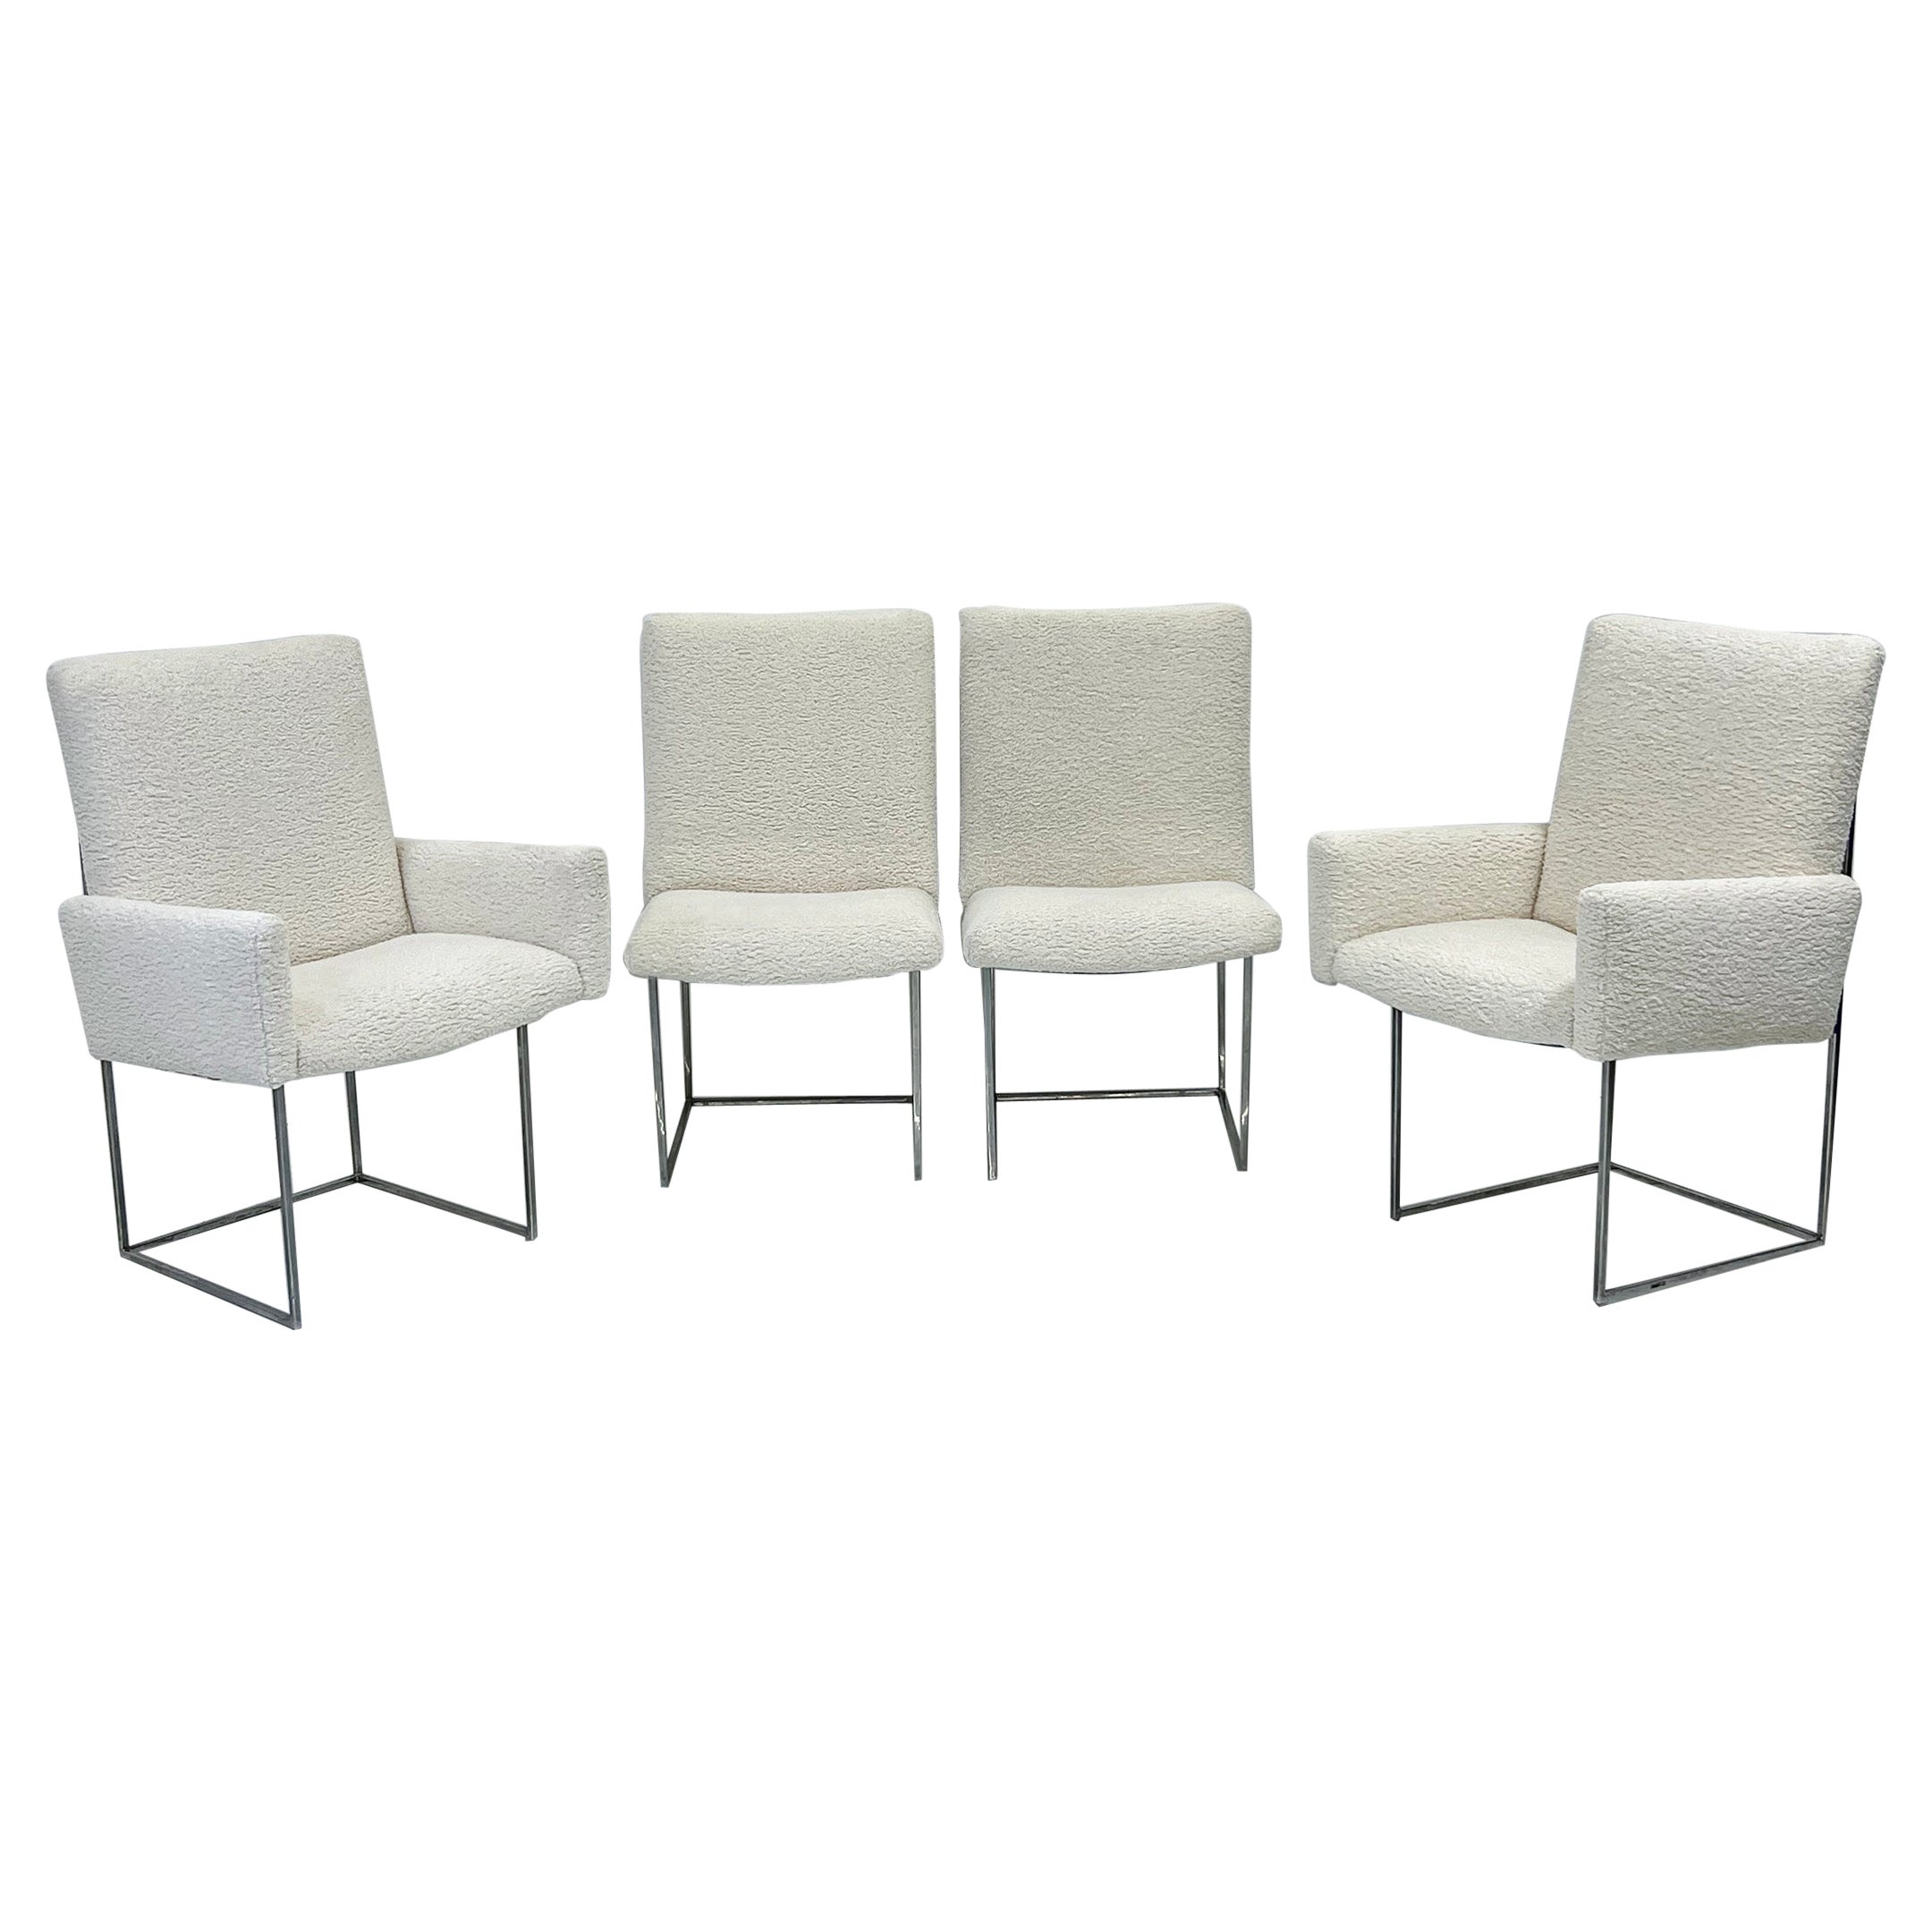 Set of 4 Milo Baughman Thin Line Dining Chairs in Ivory Boucle, 1970s For Sale